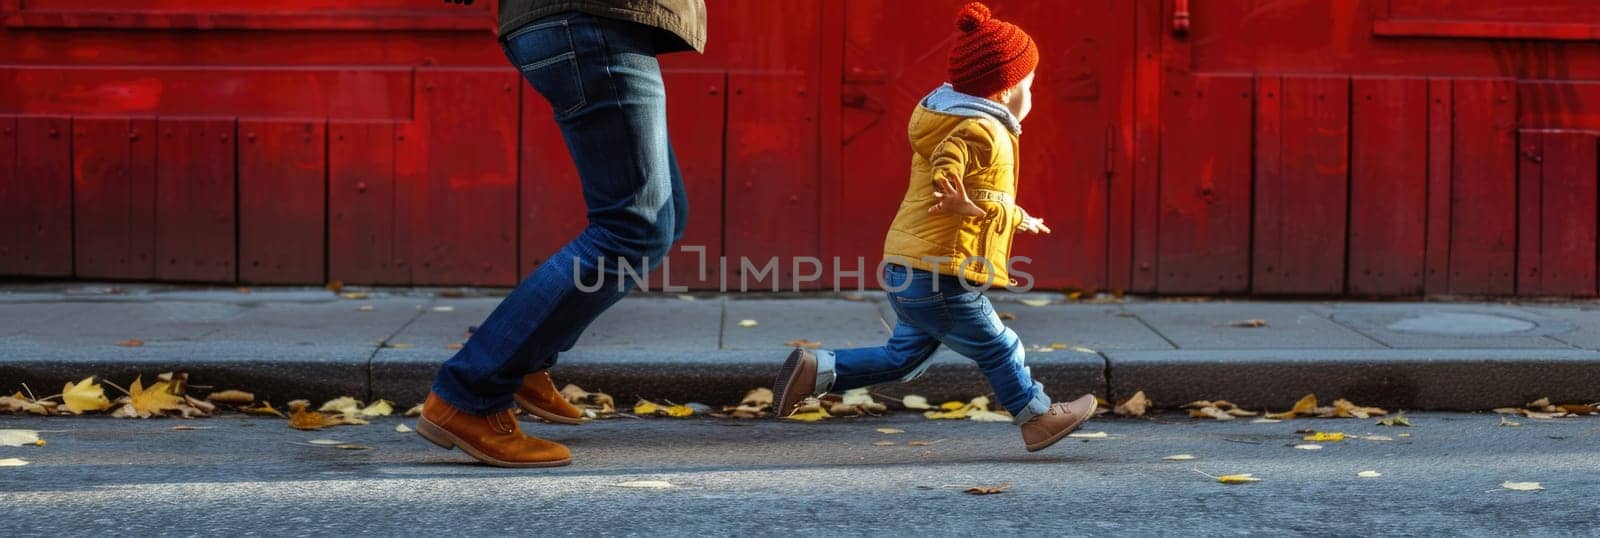 A man and a child walk together on a street, taking small steps as they make their way forward.